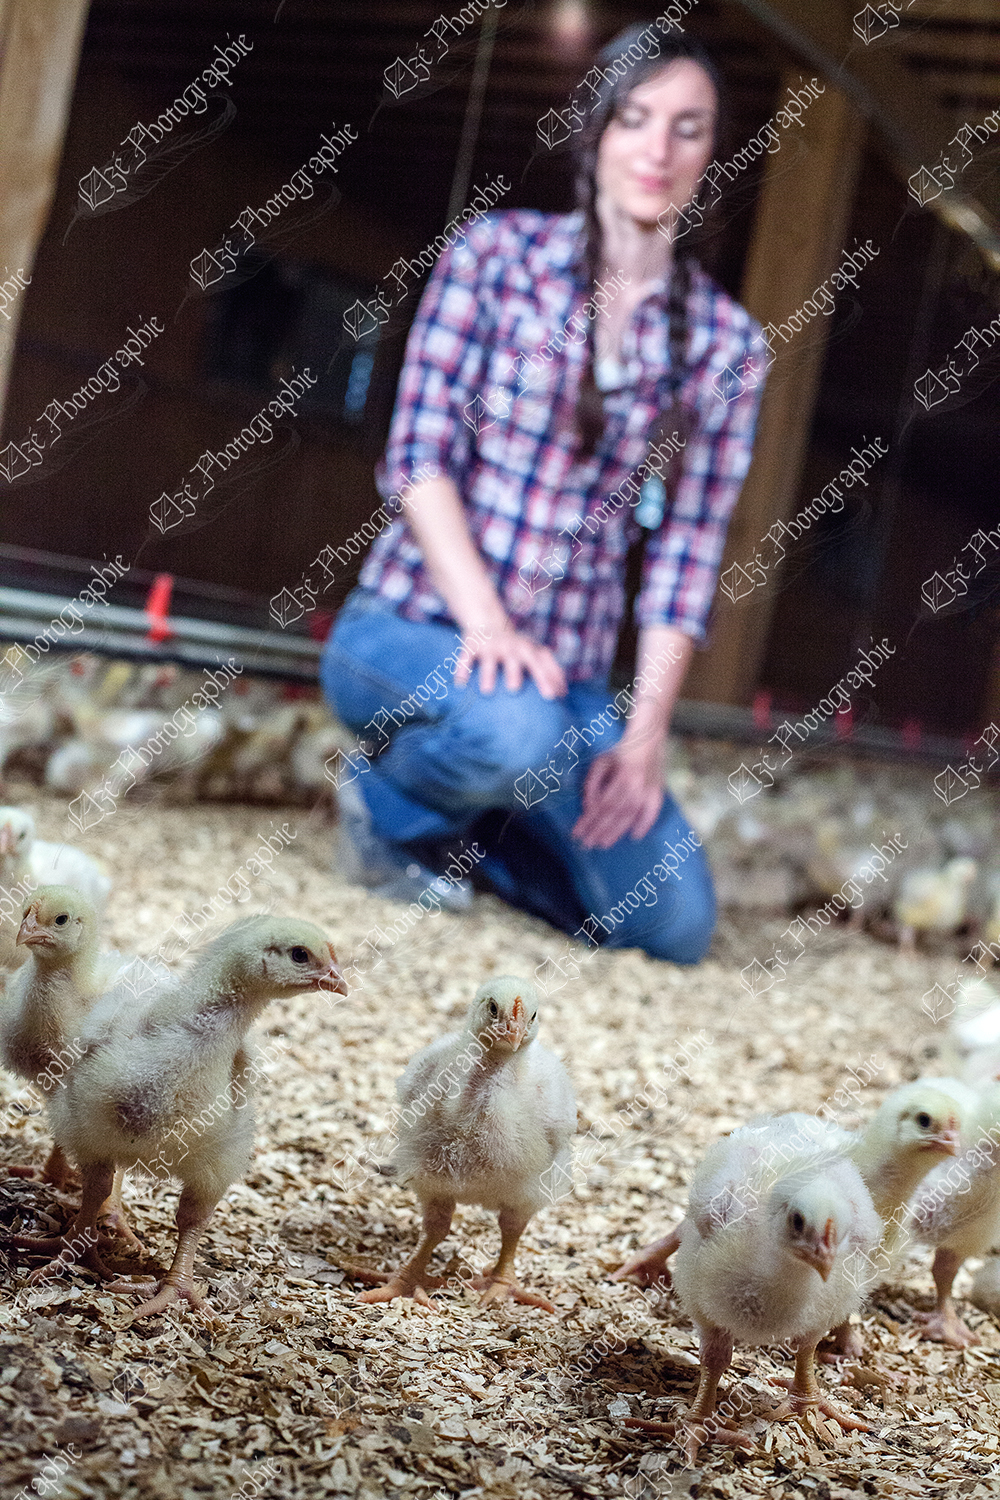 elze_photo_9058_poussins_elevage_ripe_broiler_house_chicken